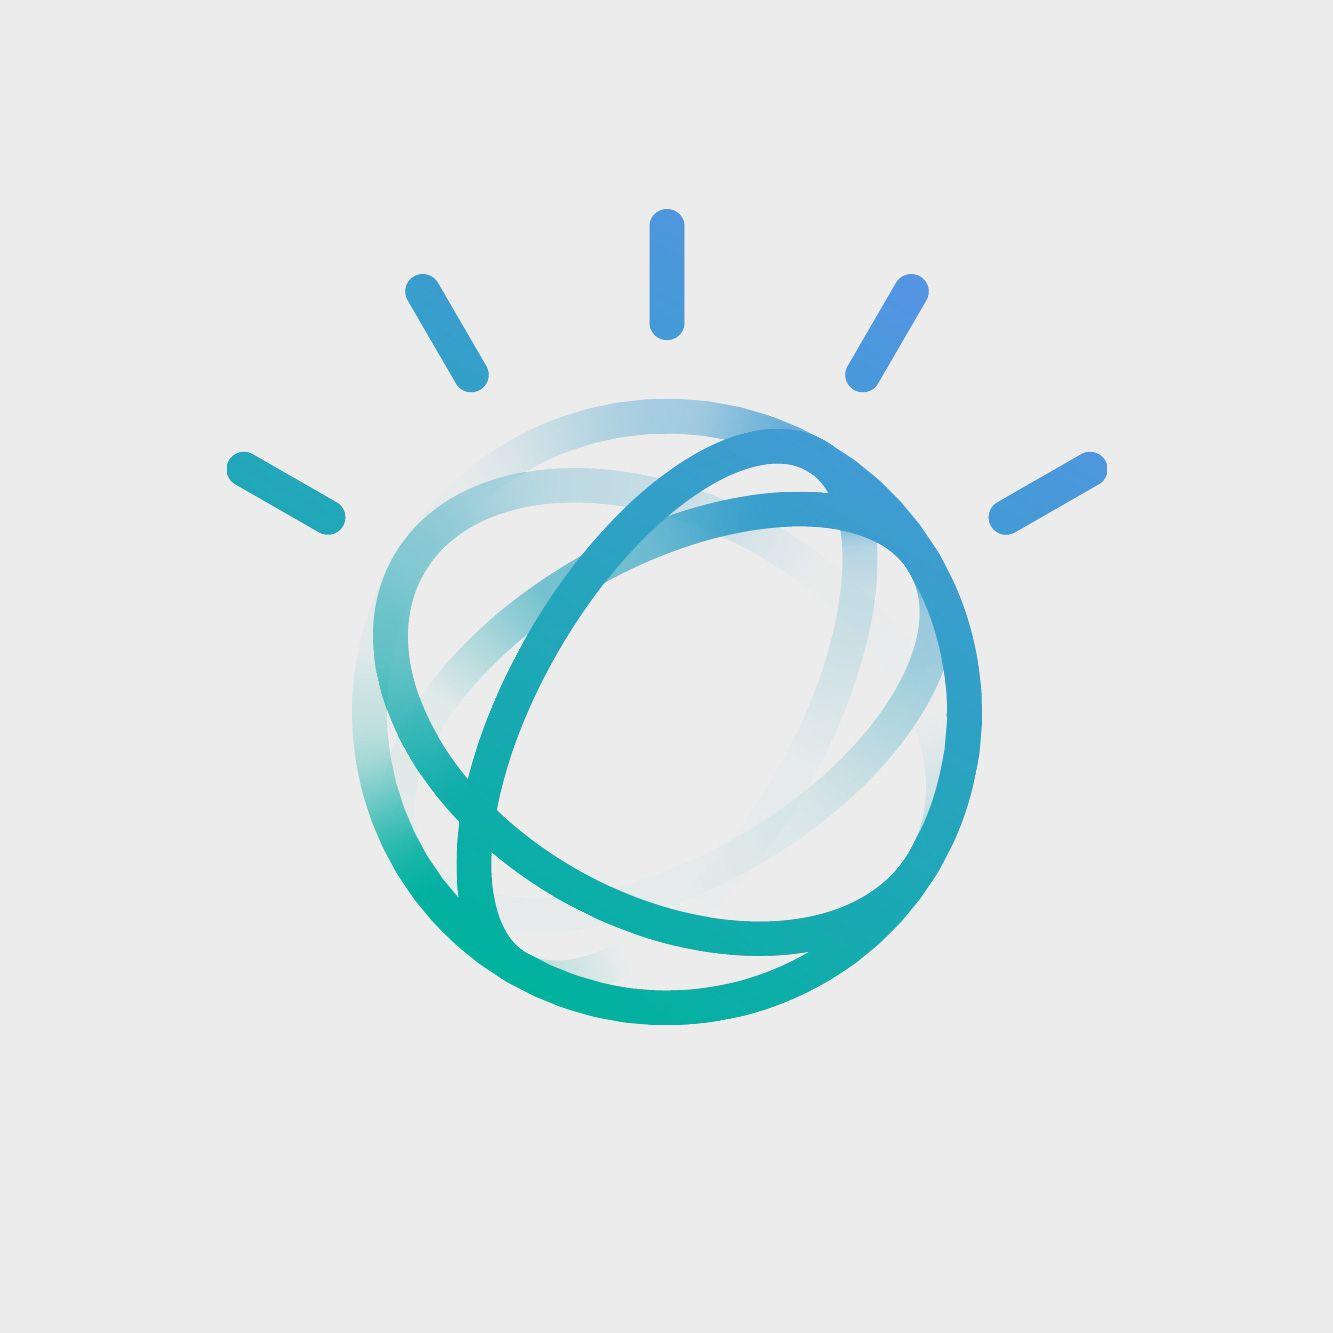 New IBM Logo - Brand New: New Logo And Identity For IBM Watson Done In House With